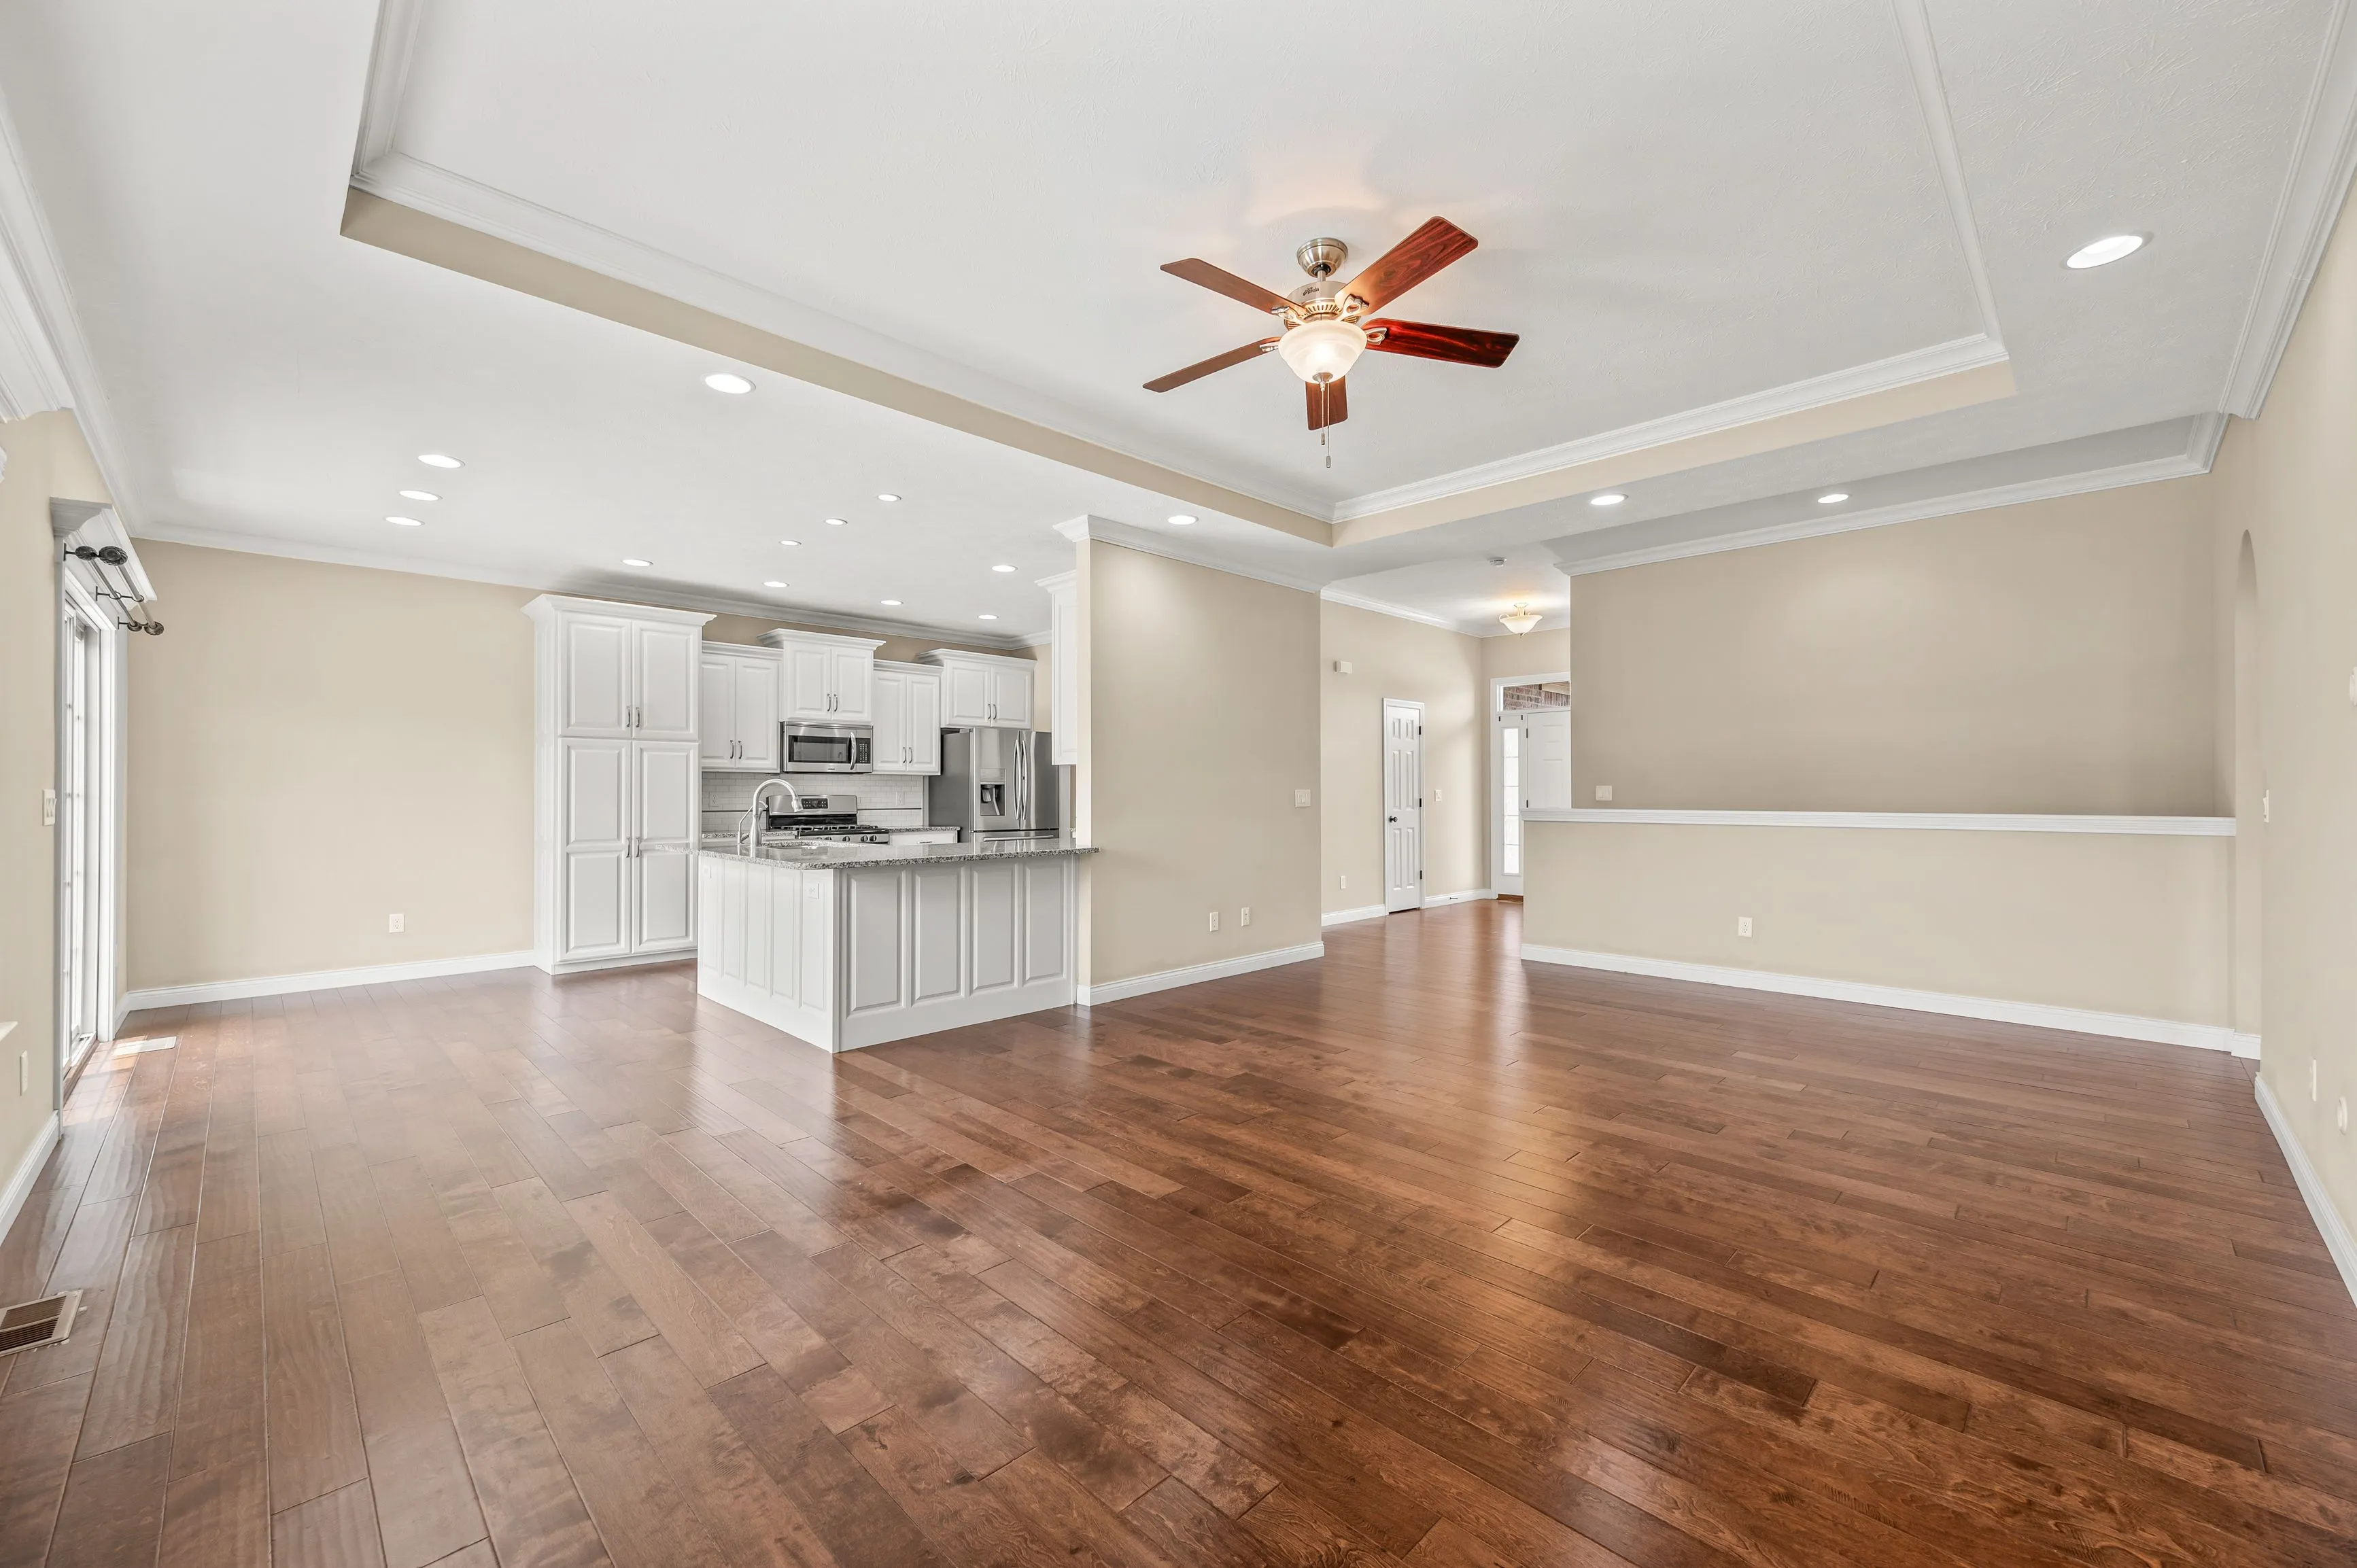 Empty spacious interior of a house with wooden floors, white walls, and a kitchen area in the background with a ceiling fan.